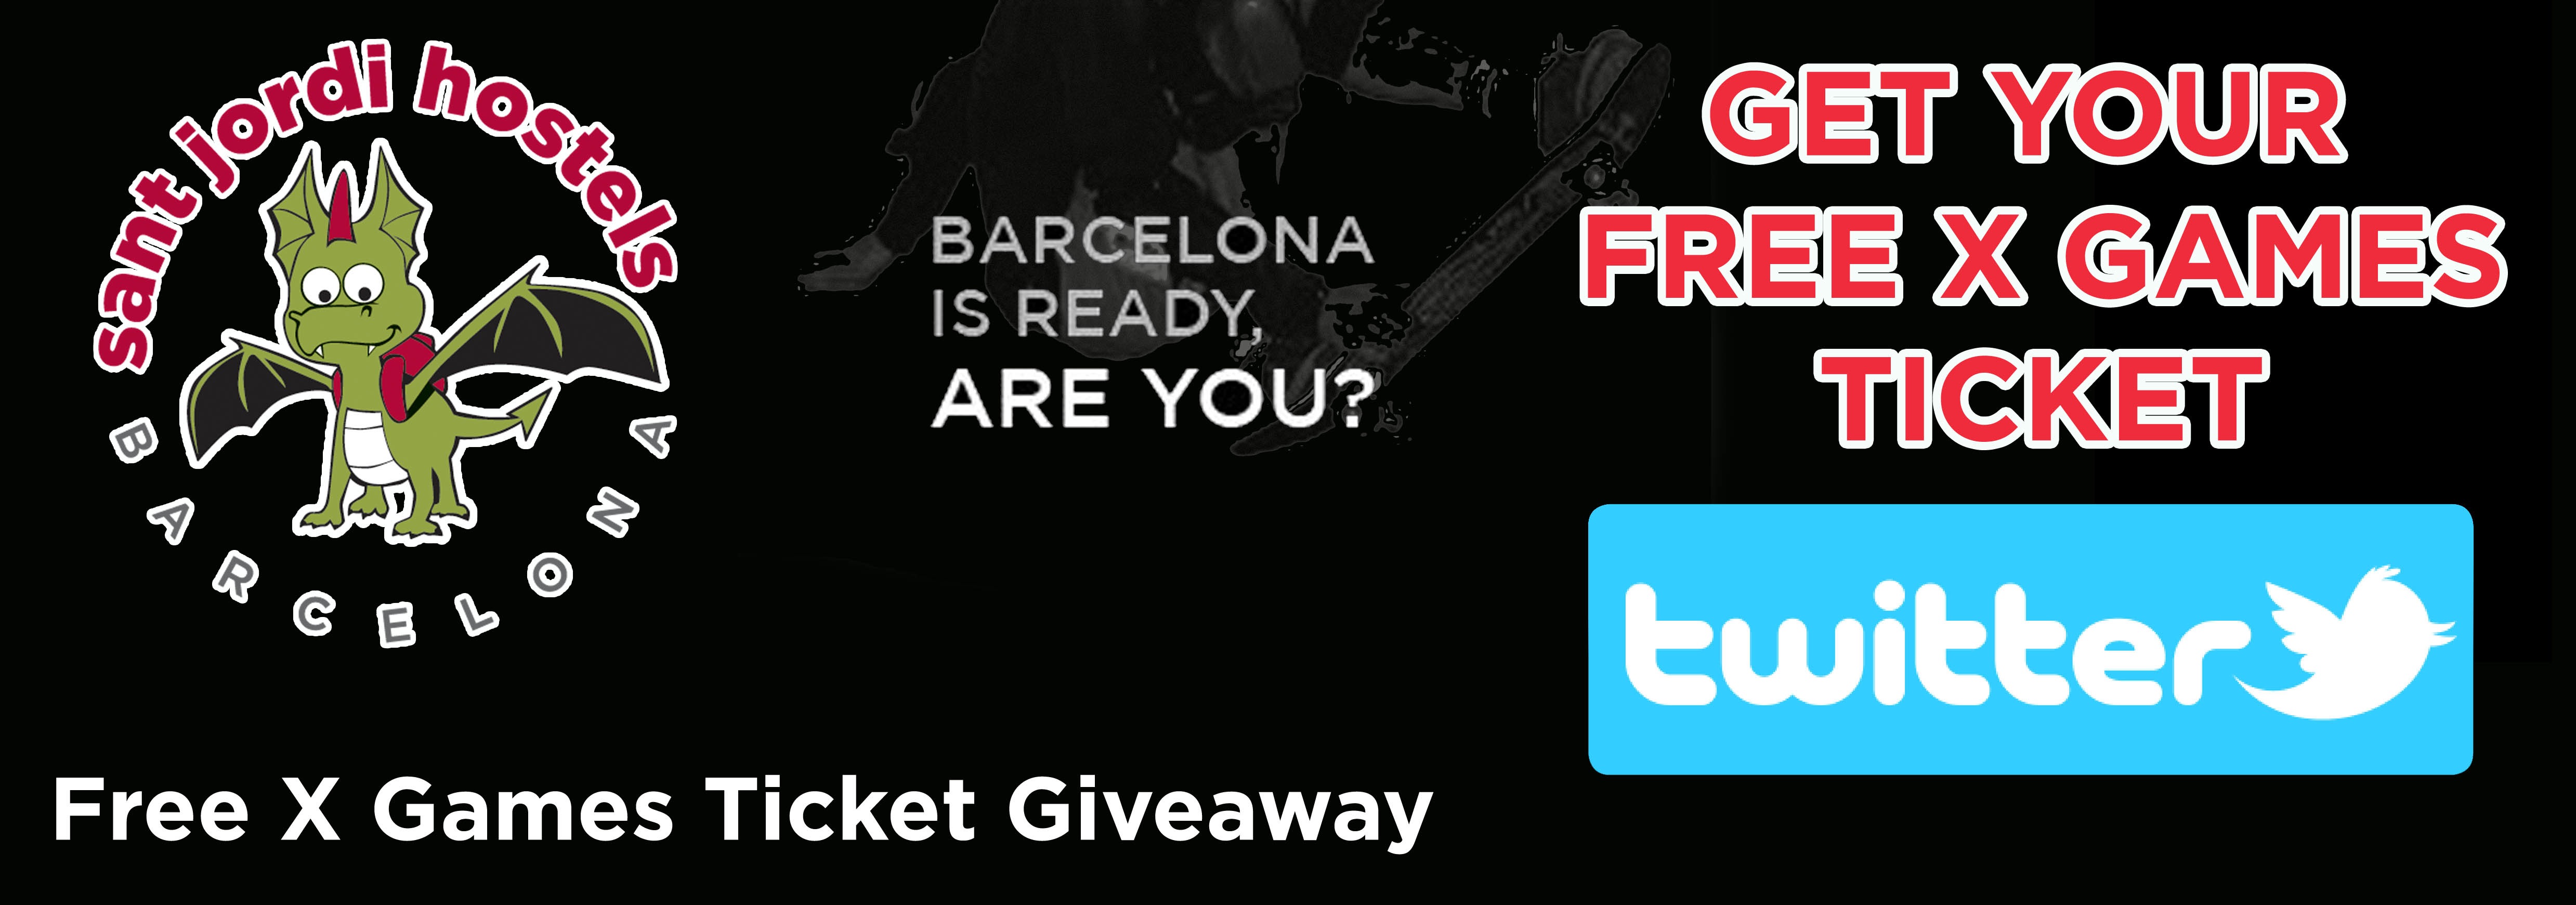 Free x games barcelona tickets giveaway